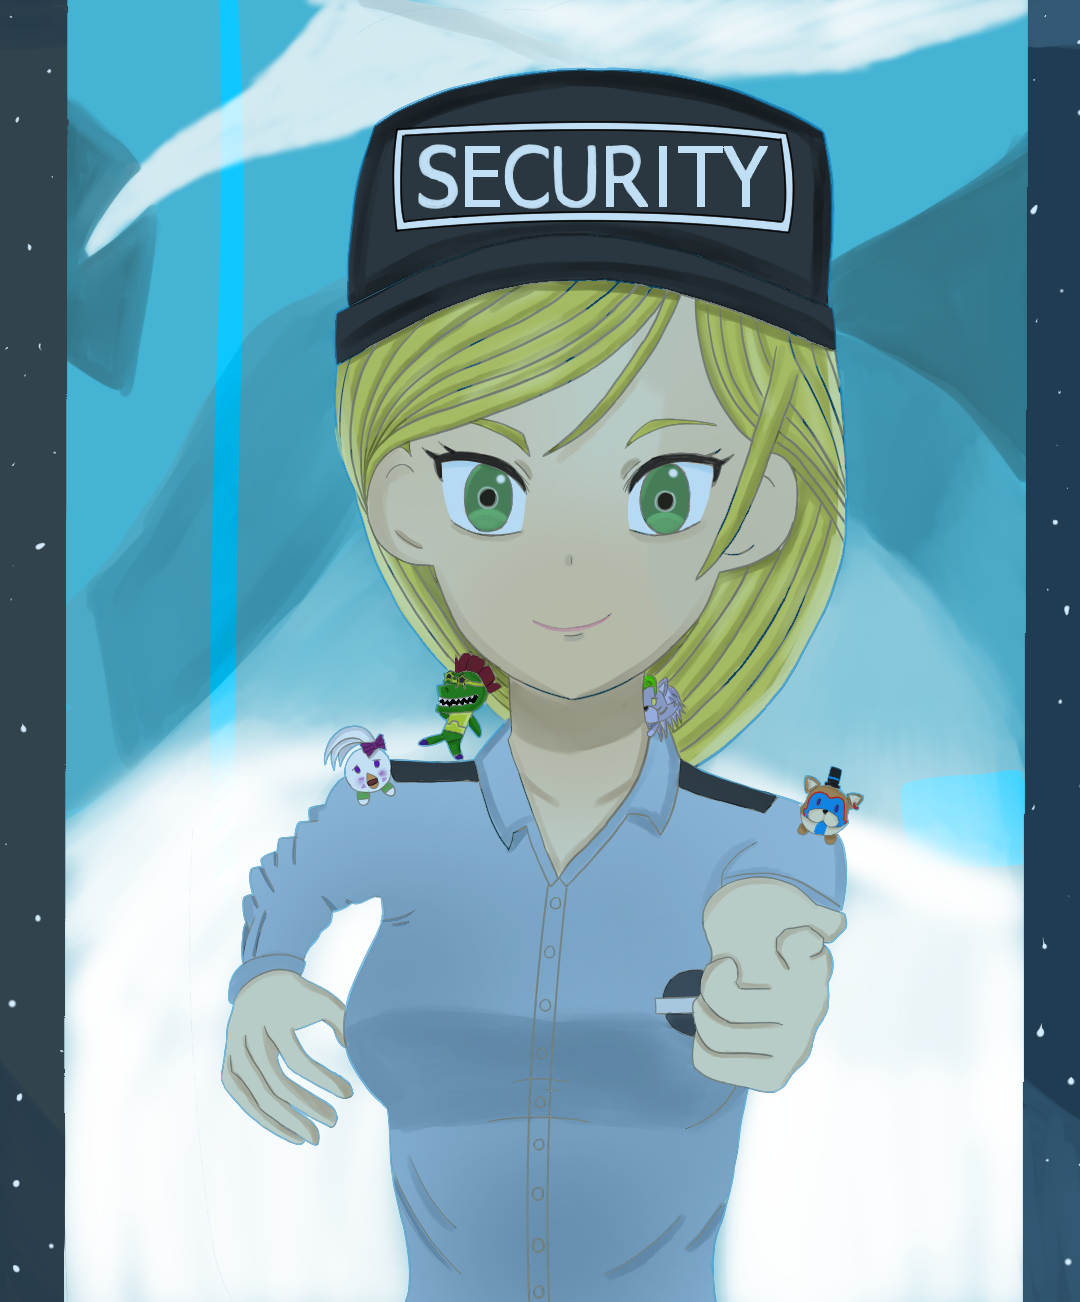 Top 10 things for Security breach DLC by Willtheraven1 on DeviantArt